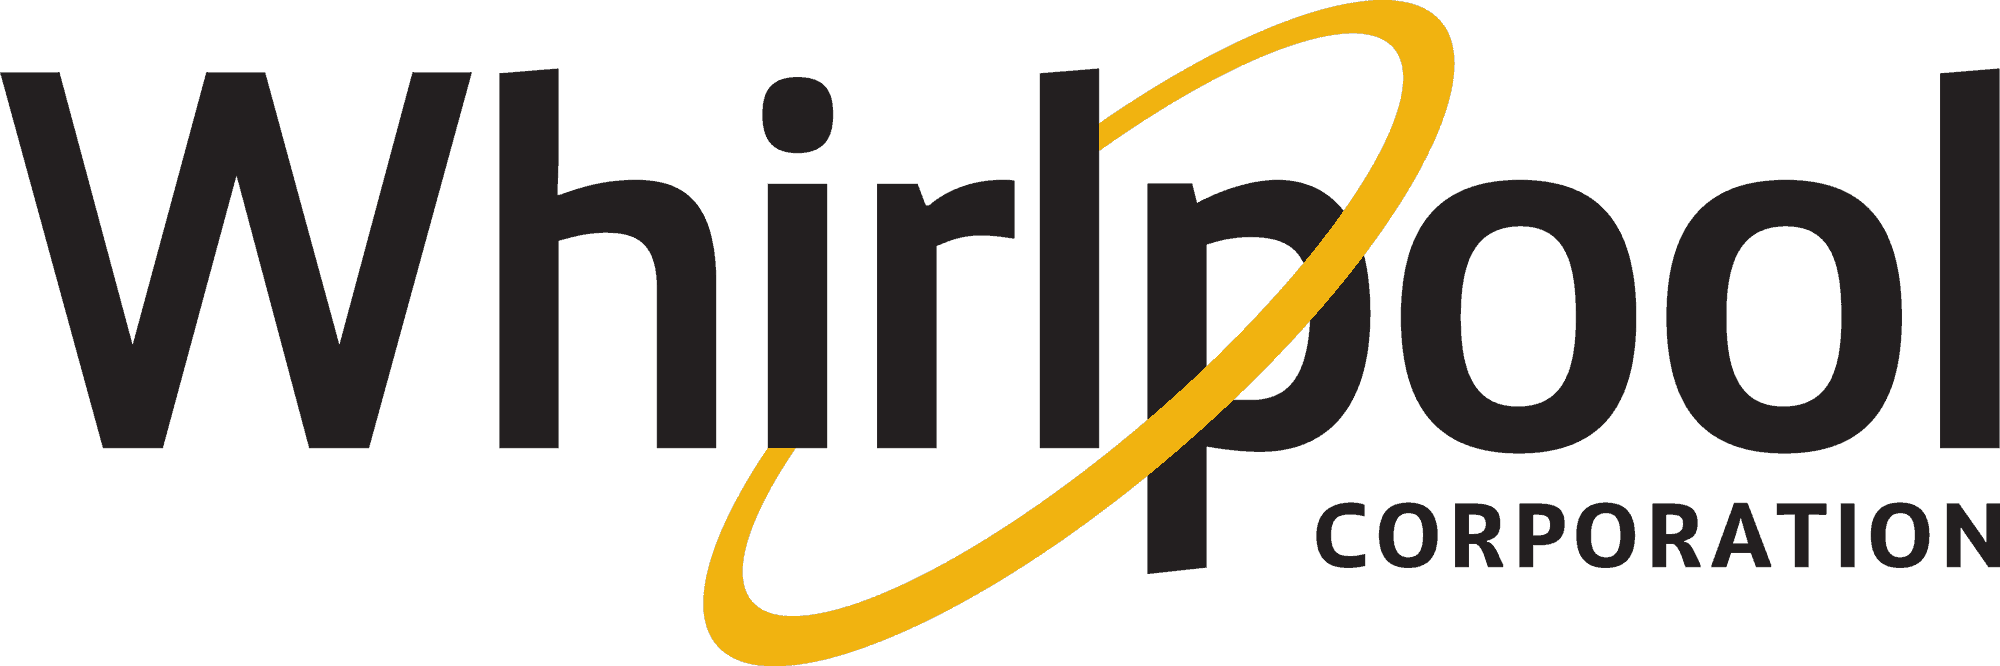 Whirlpool corporation logo represents the strong leadership and vision of its CEO in guiding and empowering technology startups as a startup mentor.